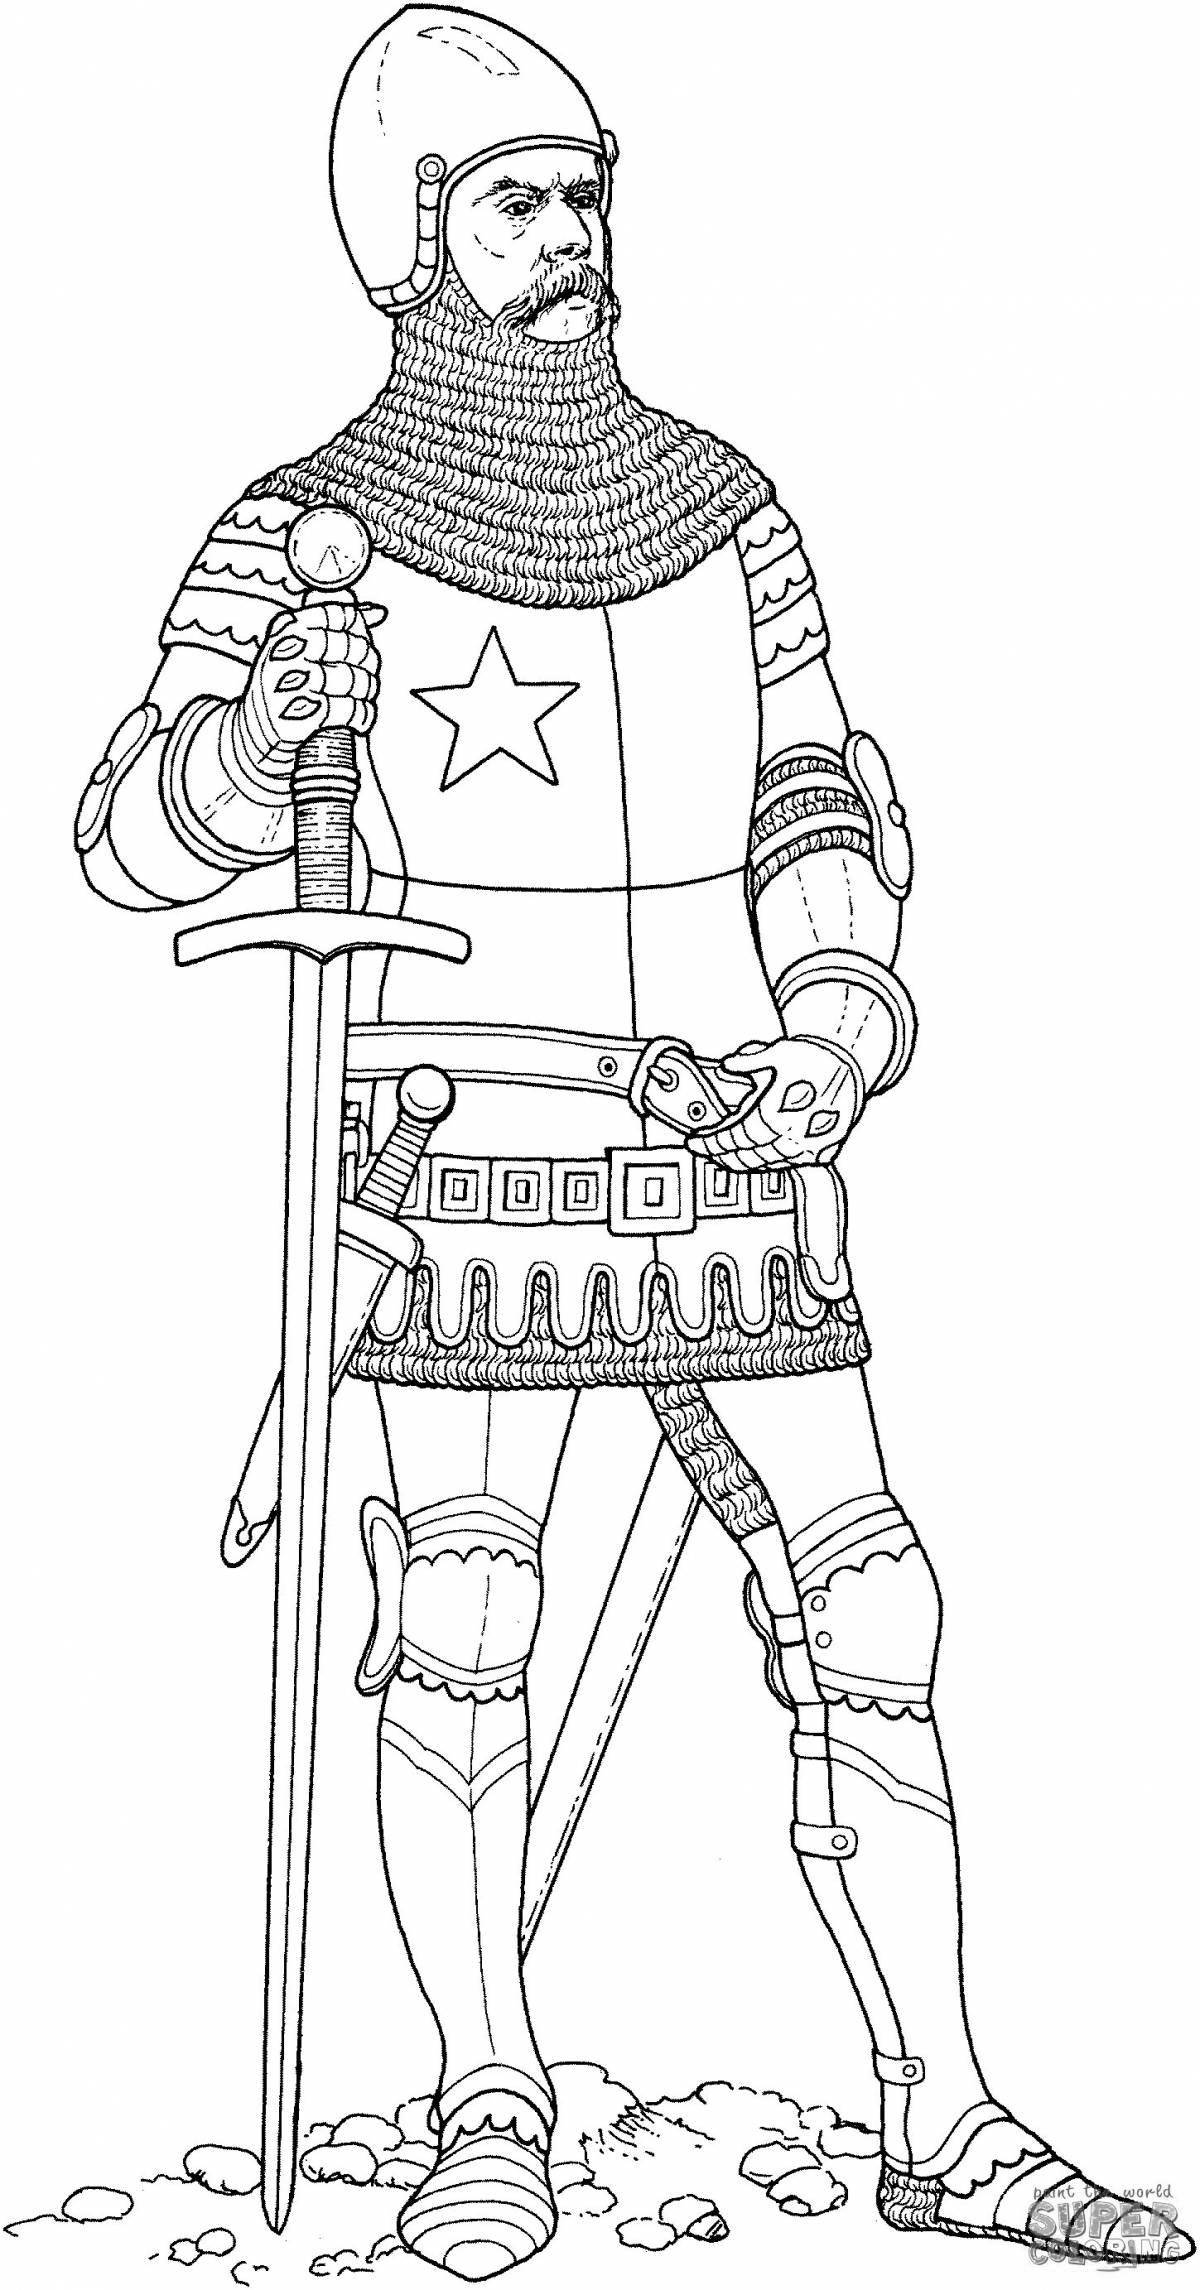 Glorious armored knight coloring book